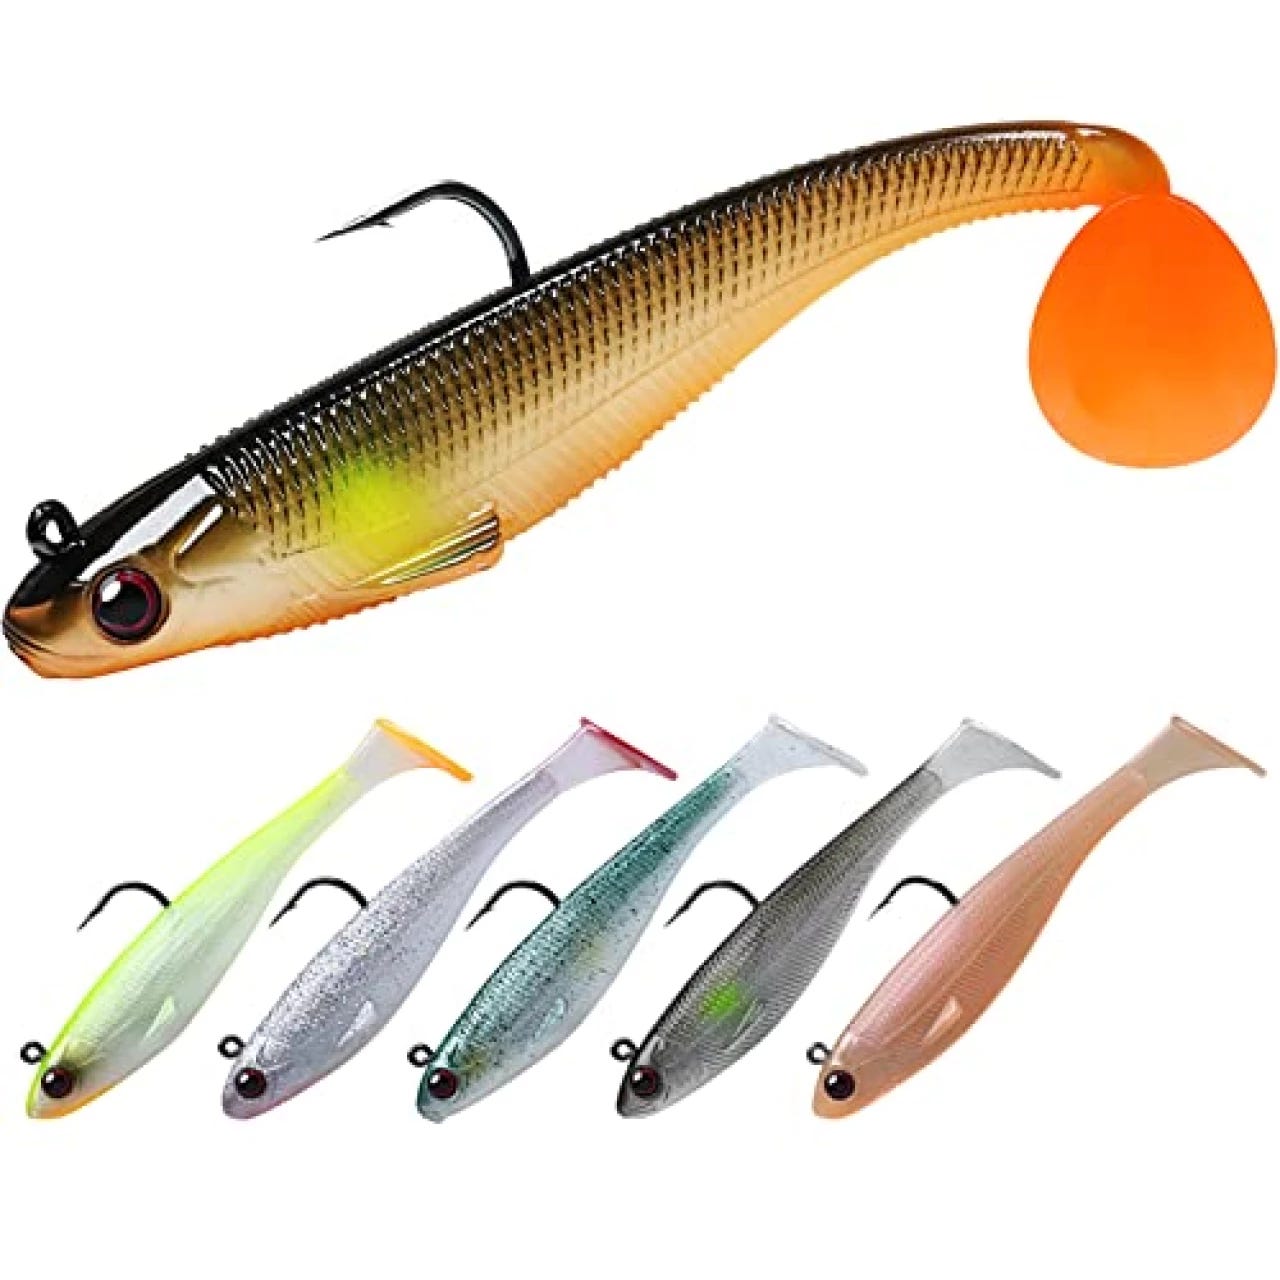 2023 TRUSCEND Fishing Lures Review: Best Bass Trout Gear